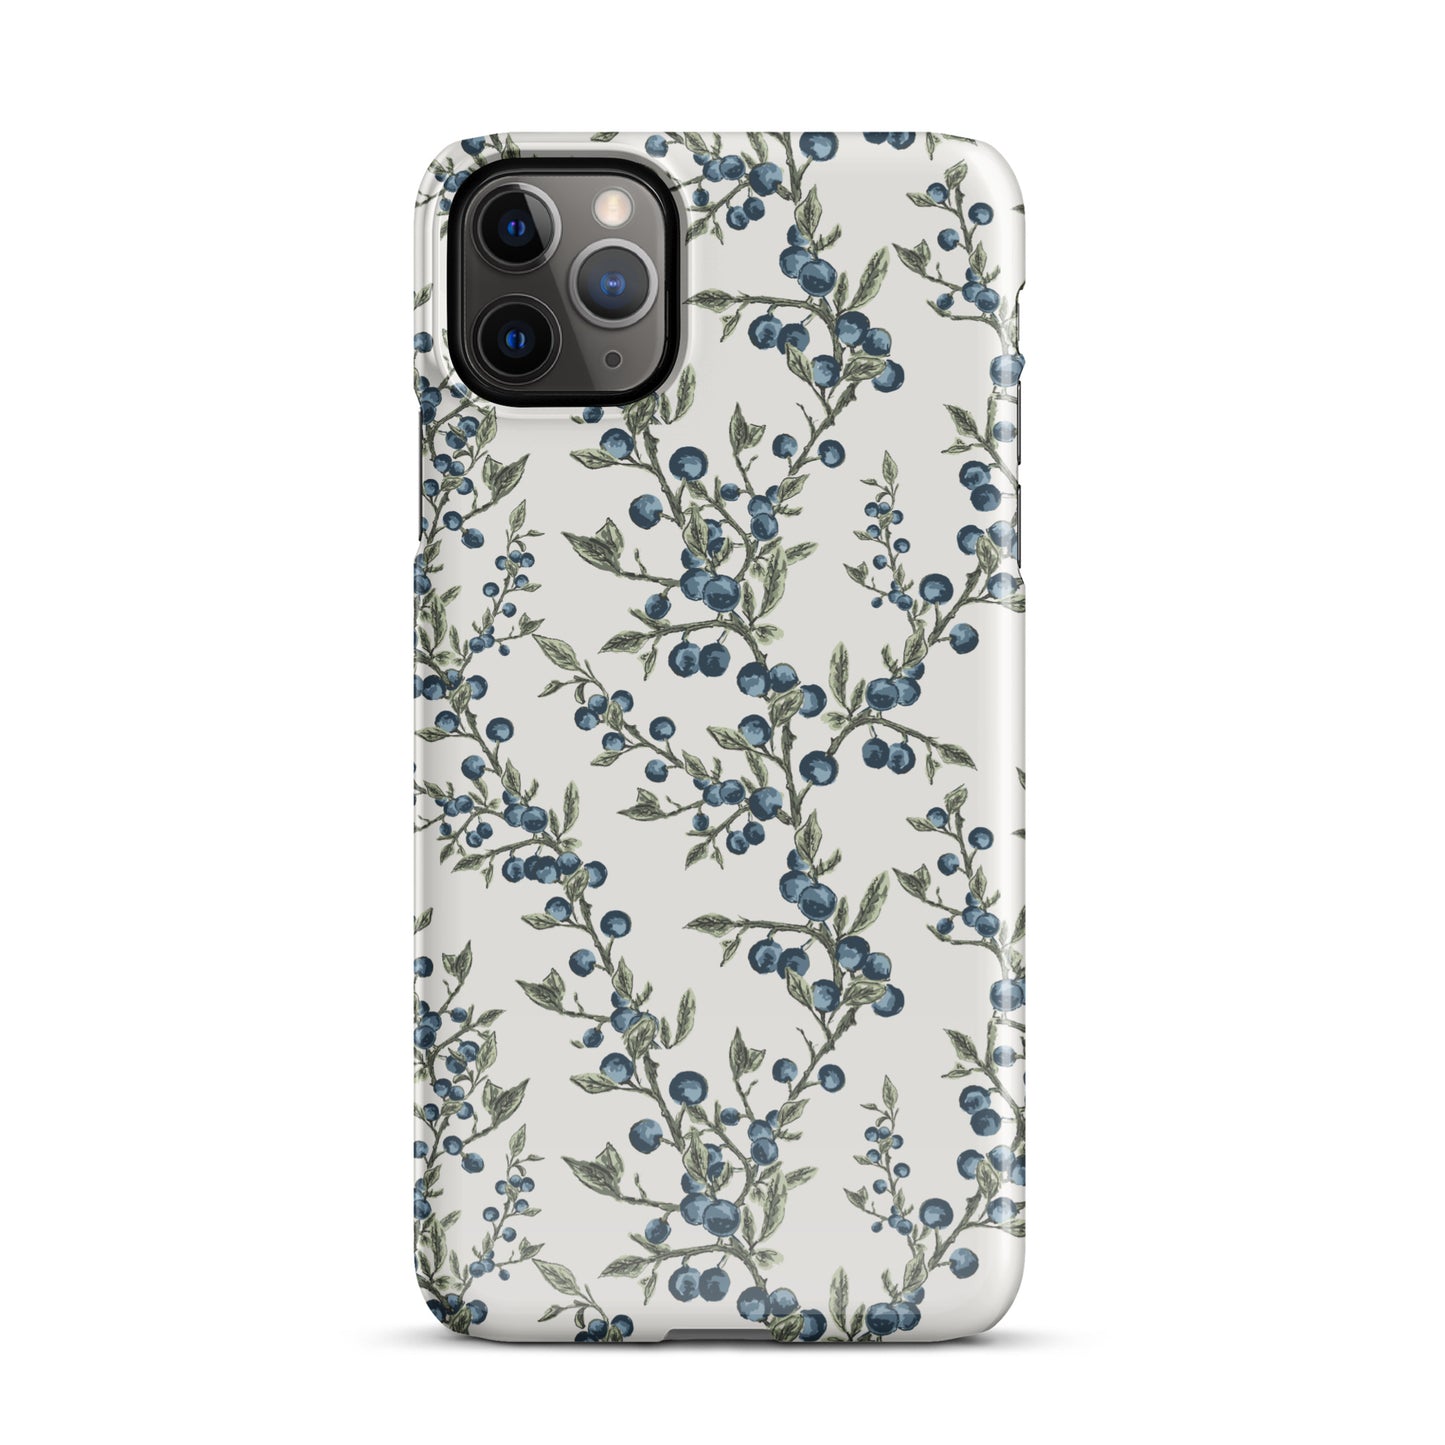 Blueberry Iphone Case